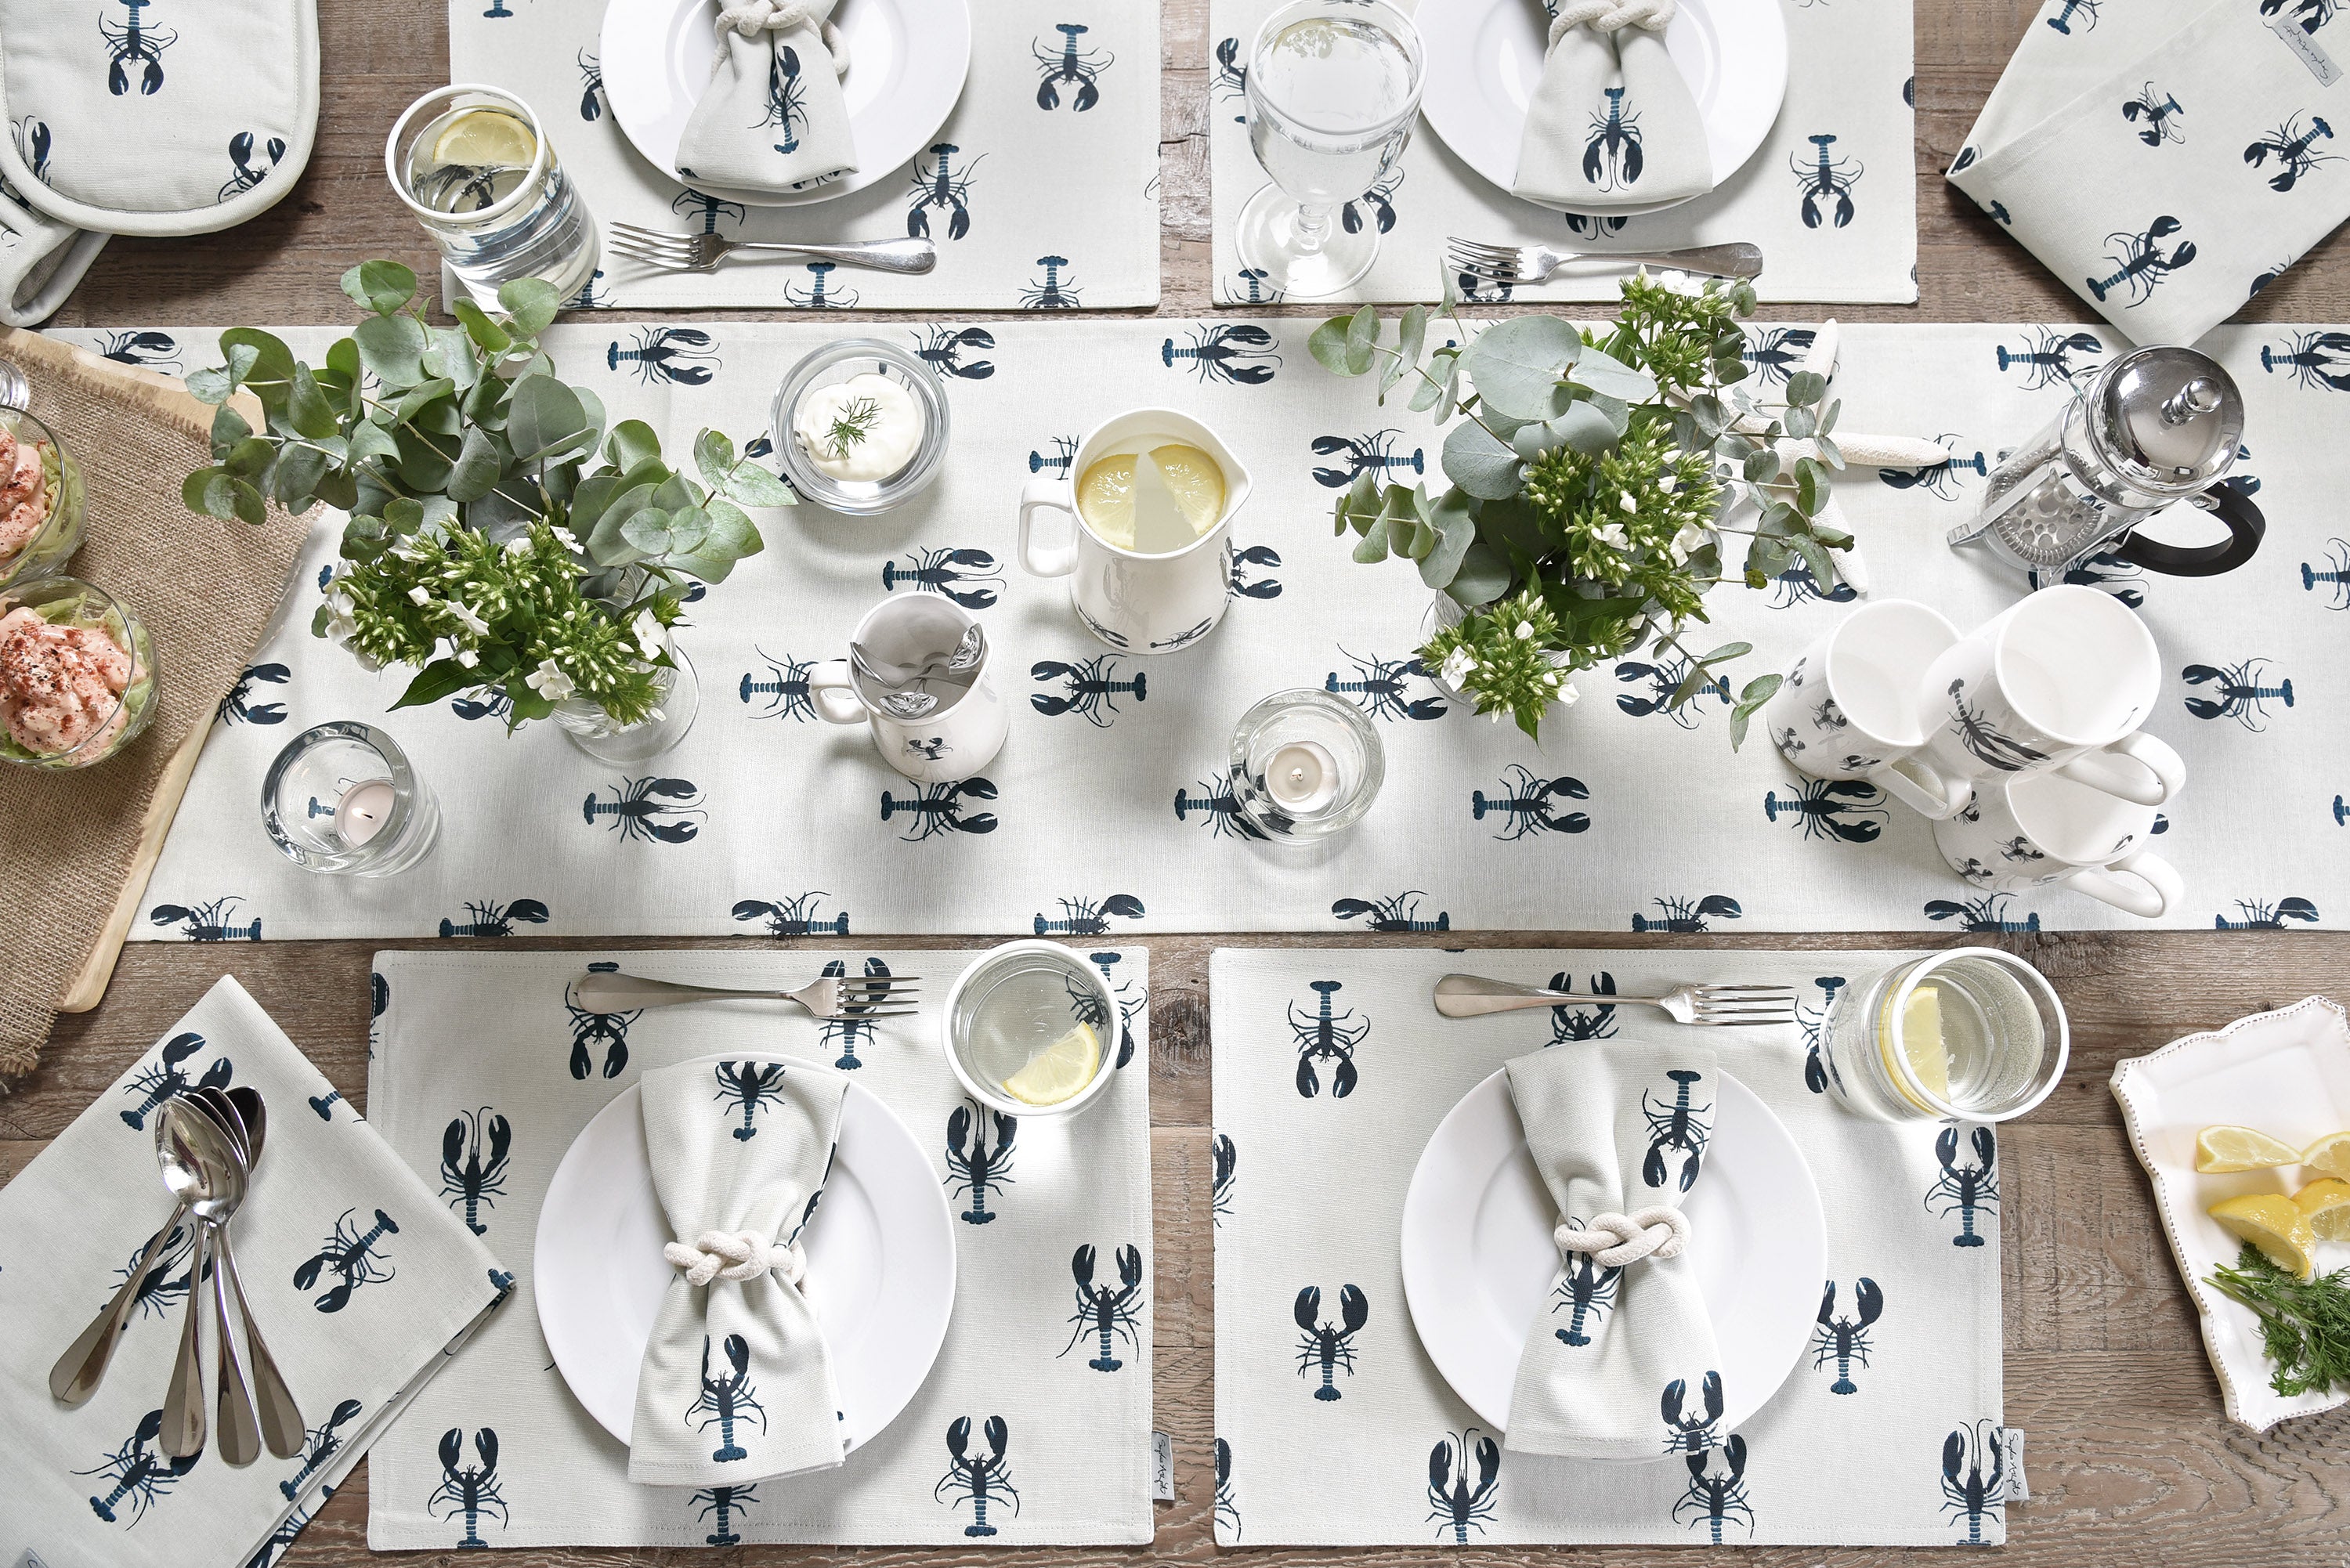 Summer table setting by Sophie Allport